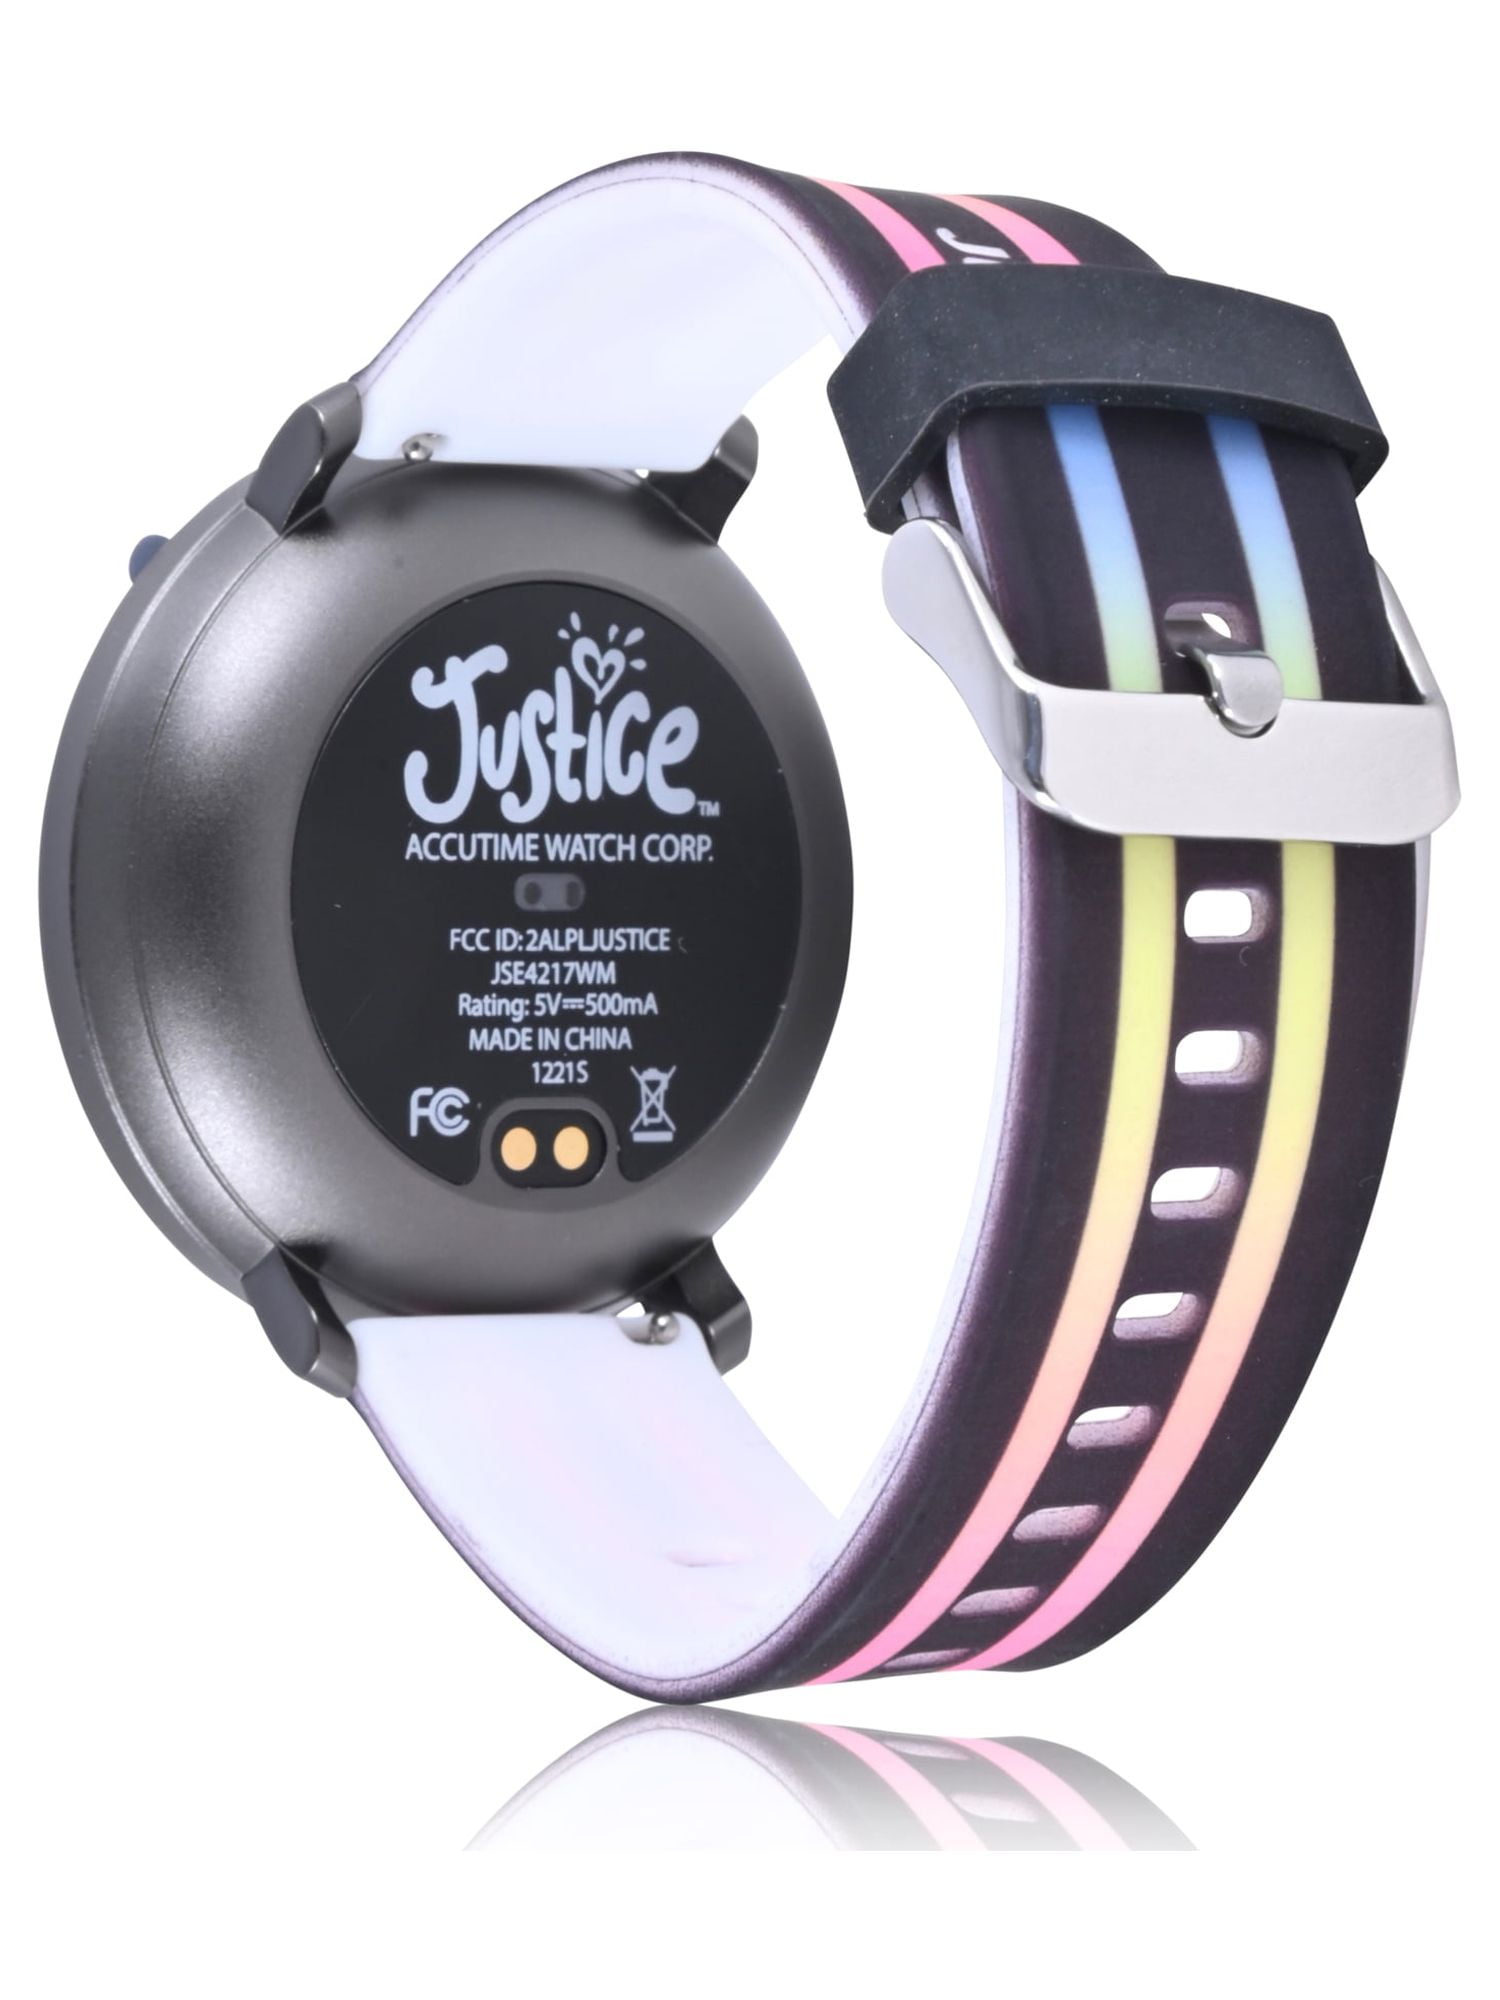 Justice Unisex Child Smartwatch with Perforated Band in White (jse4202wm), Girl's, Size: One size, Grey Type